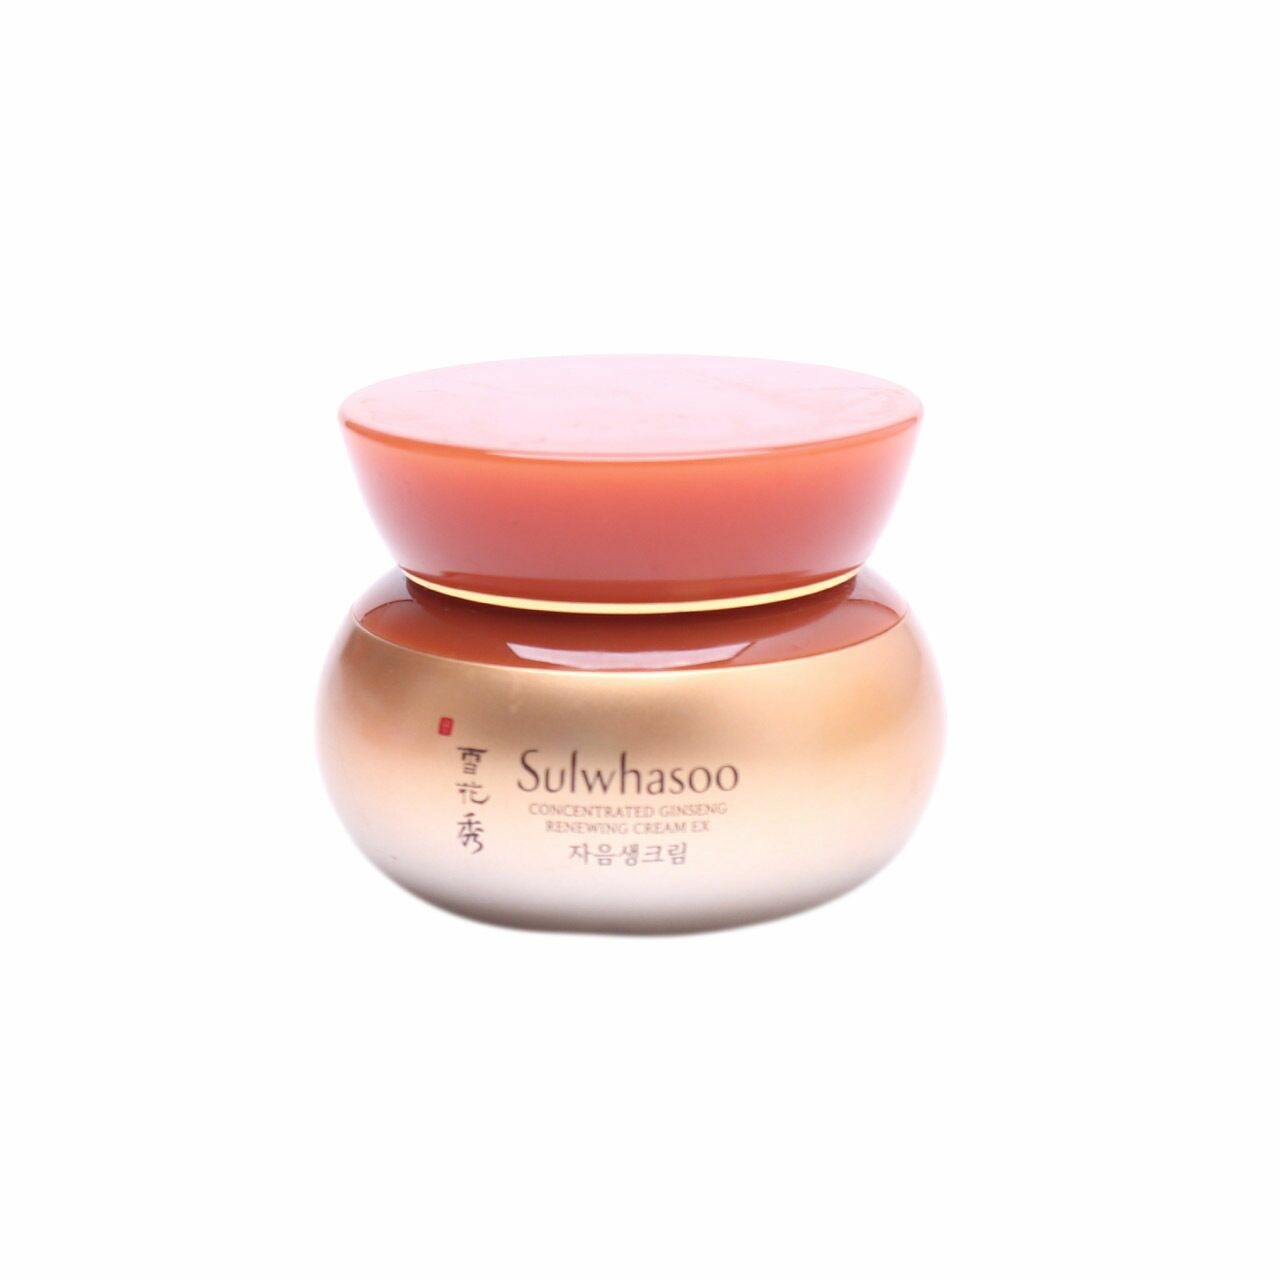 Sulwhasoo Concentrated Ginseng Renewing Cream Ex Skin Care